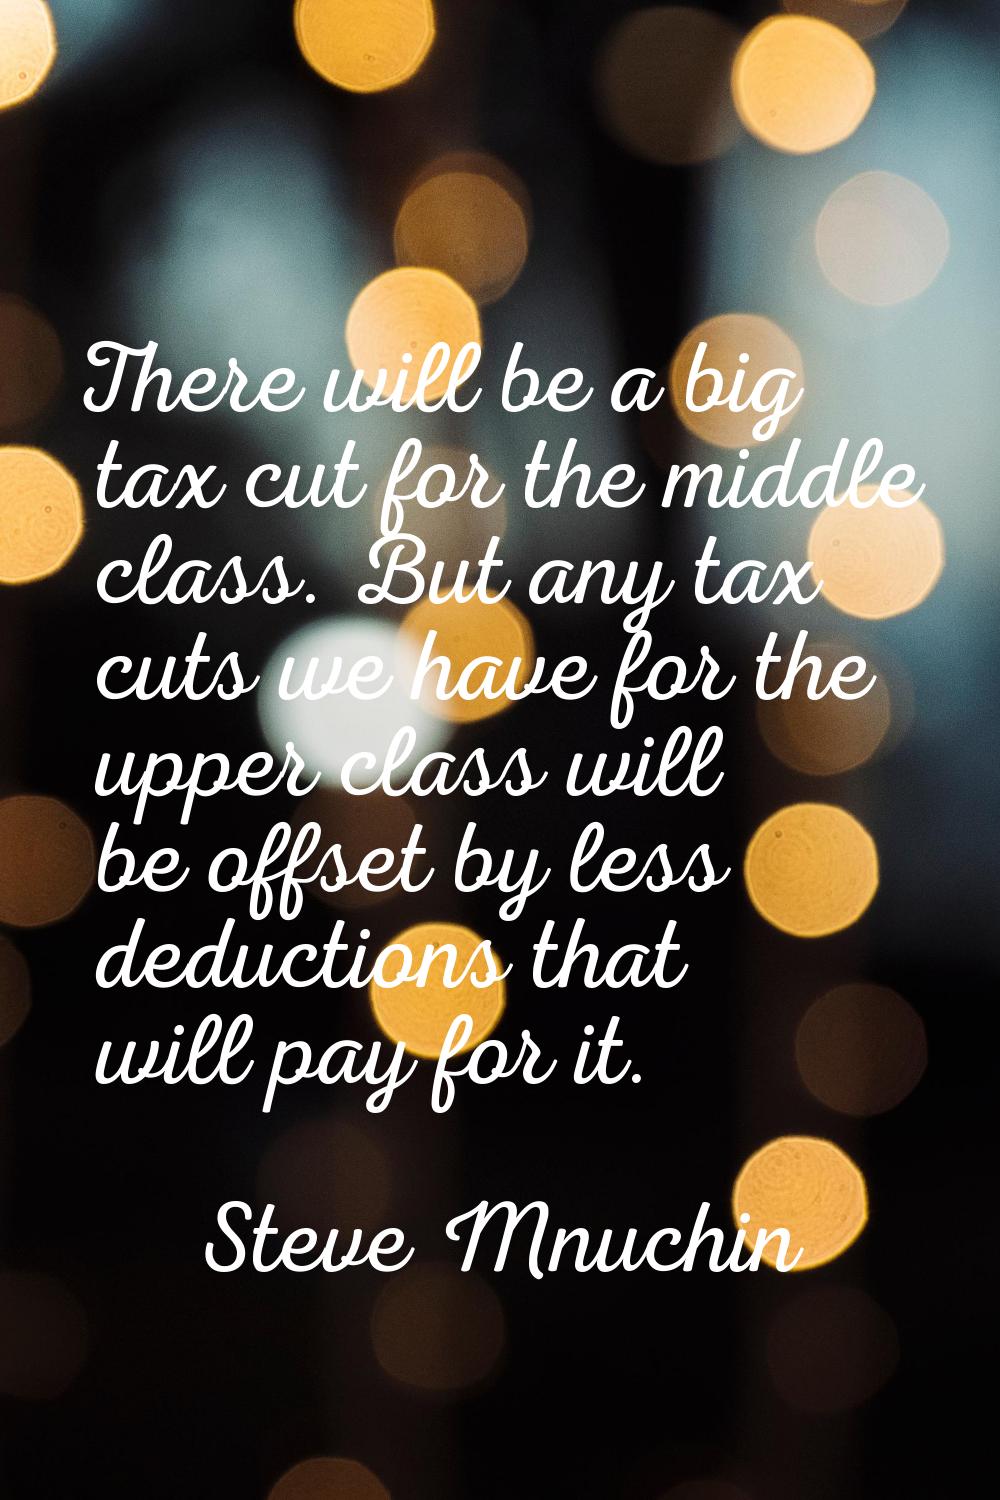 There will be a big tax cut for the middle class. But any tax cuts we have for the upper class will